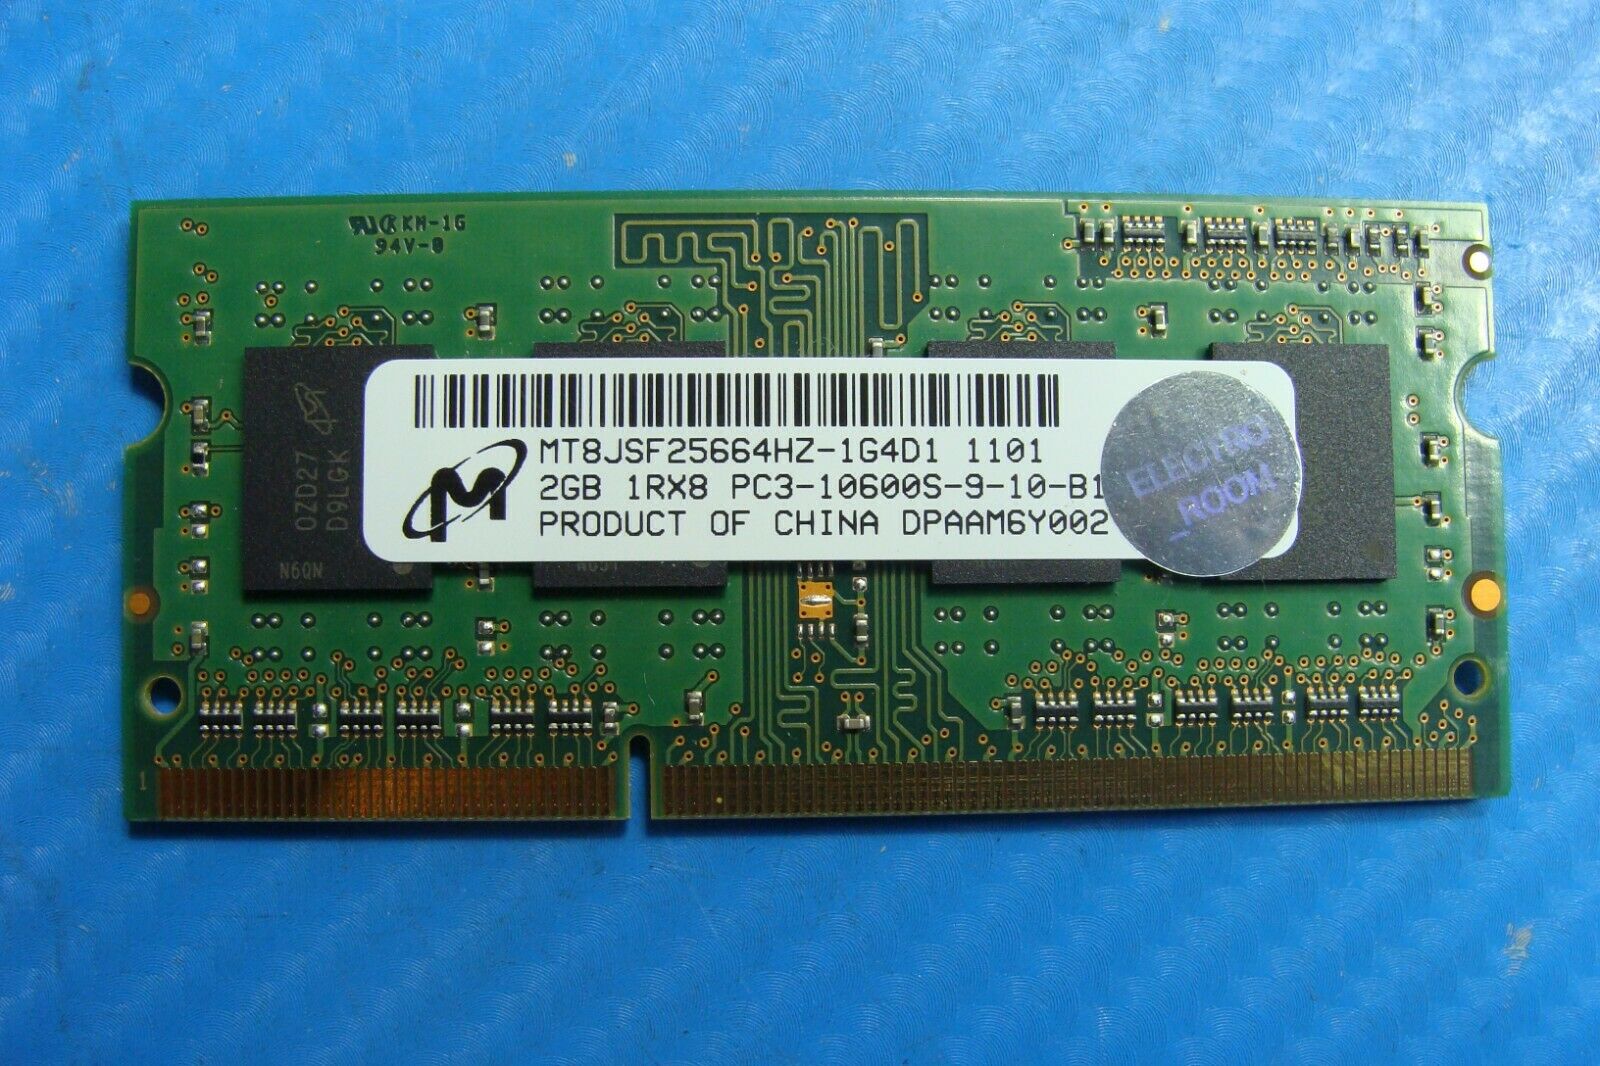 Toshiba L745-S4210 Micron 2Gb pc3-10600s Memory RAM So-dimm mt8jsf25664hz-1g4d1 - Laptop Parts - Buy Authentic Computer Parts - Top Seller Ebay